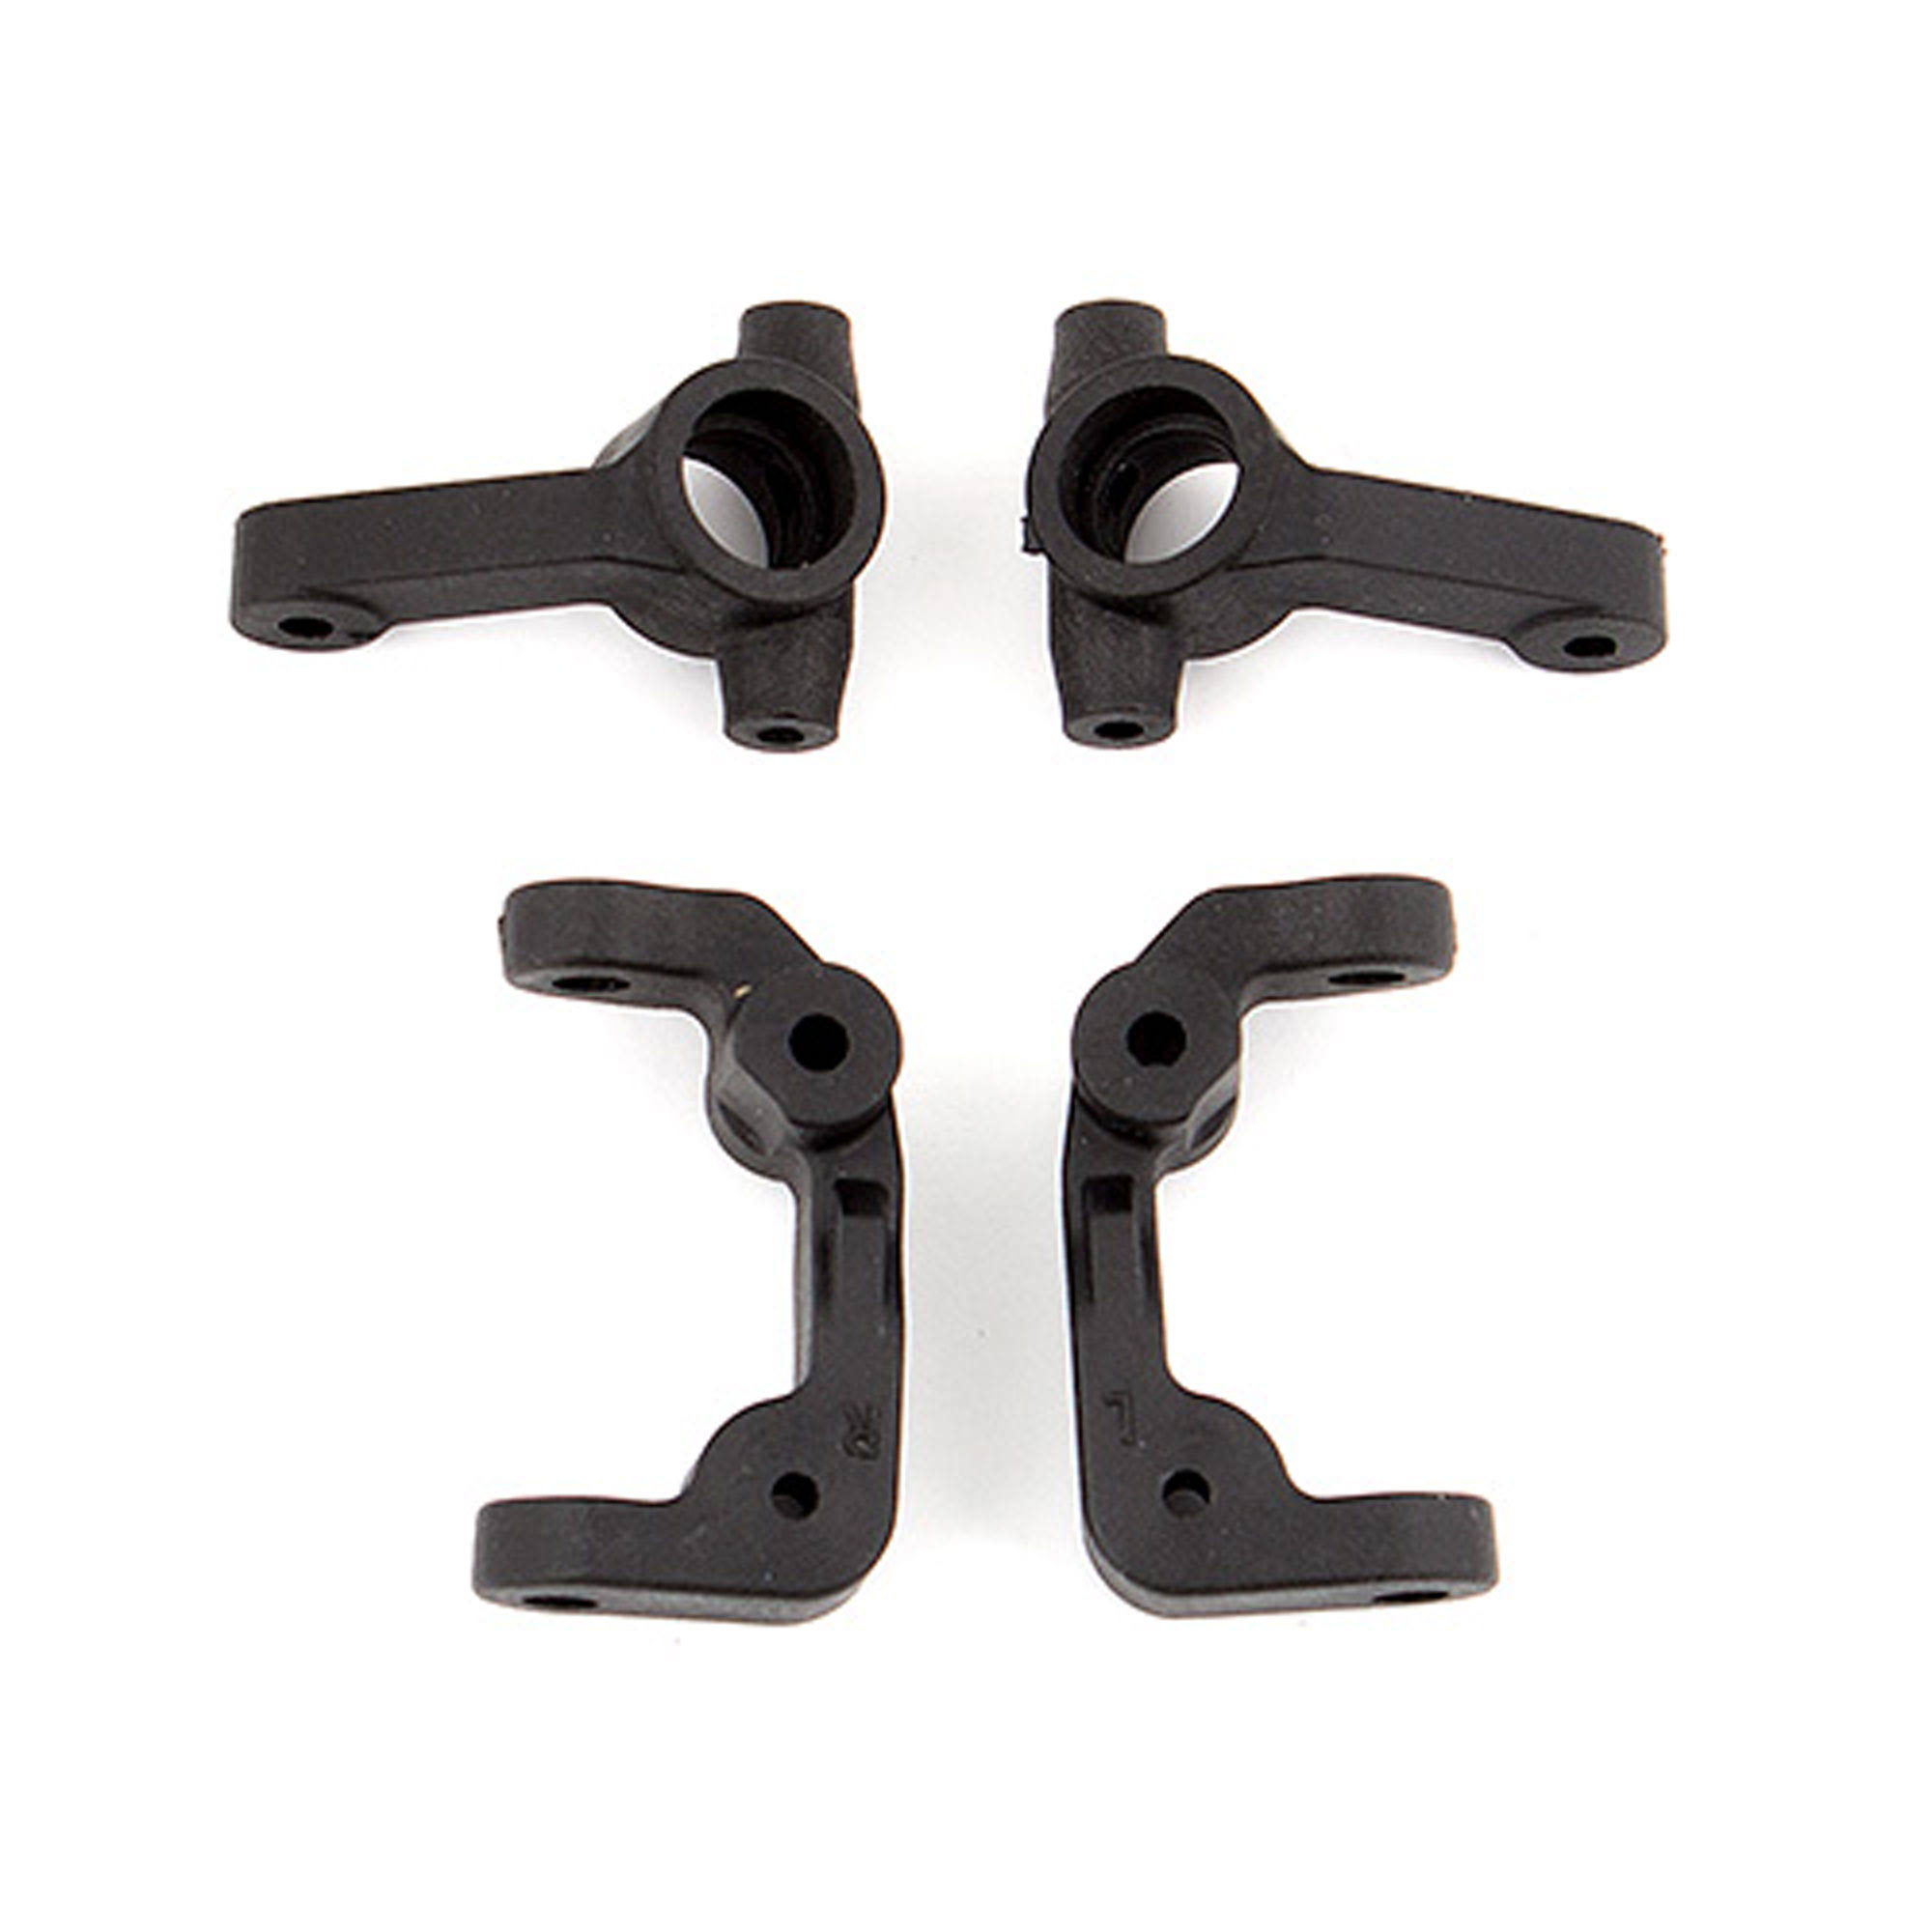 Associated Caster and Steering Blocks Car Accessories